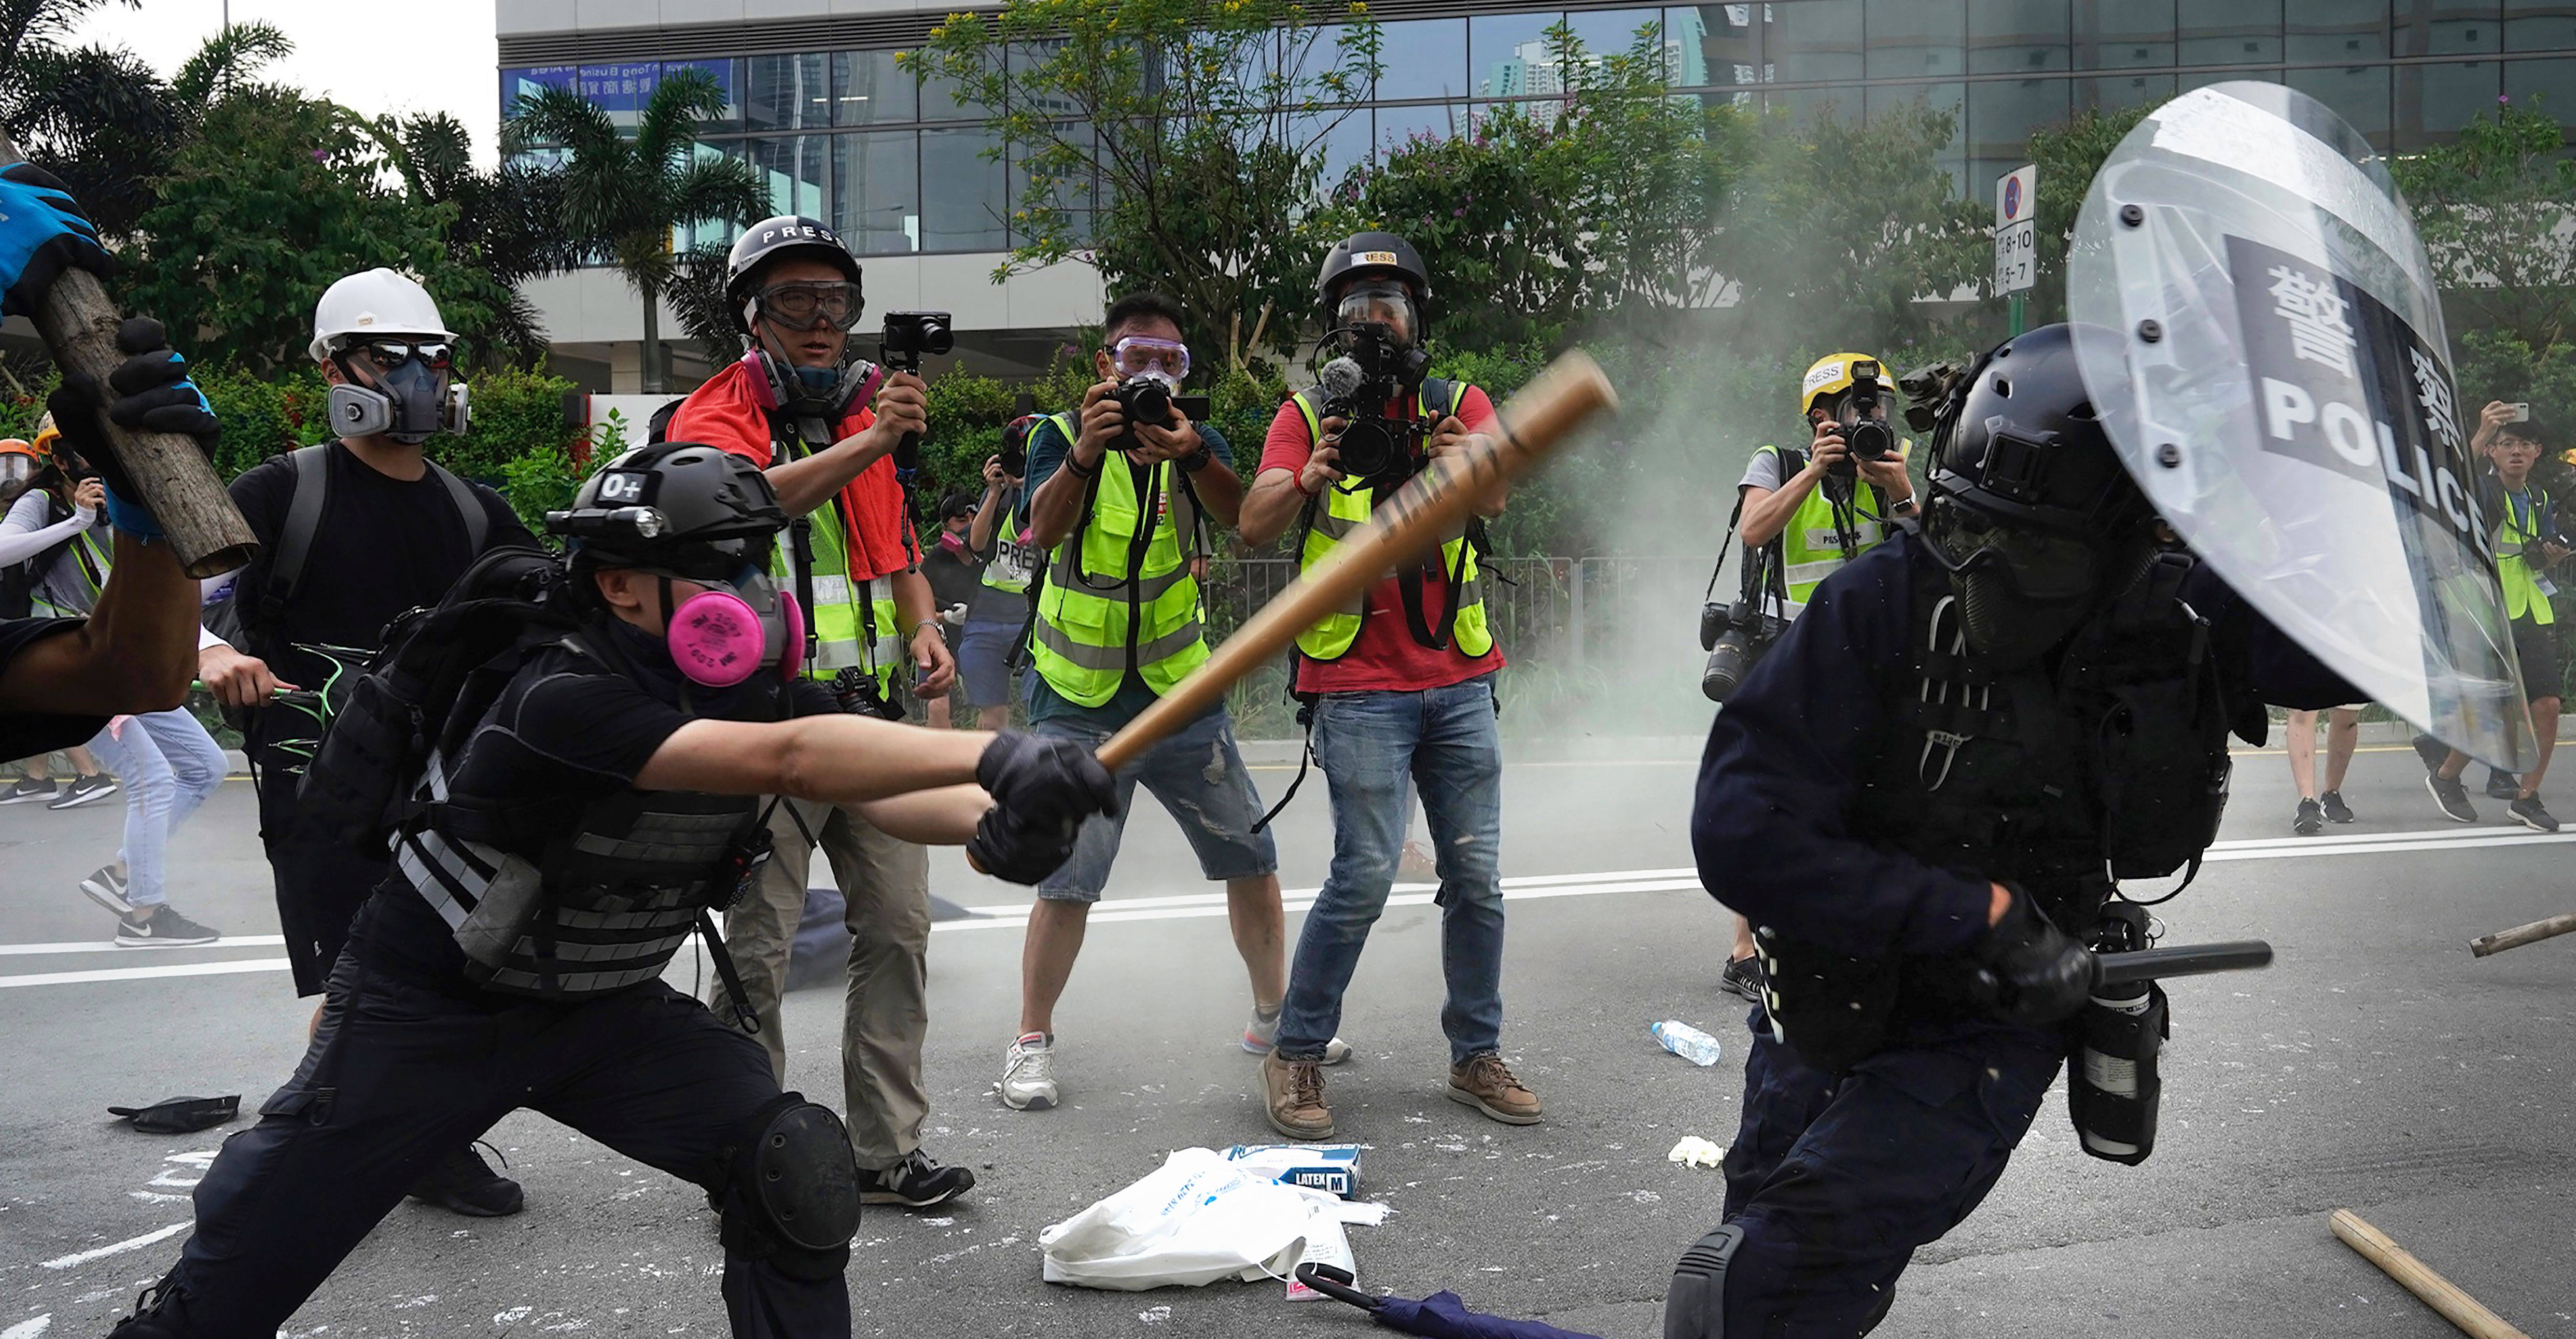 Police and demonstrators clash during a protest in Hong Kong on August 24, 2019.